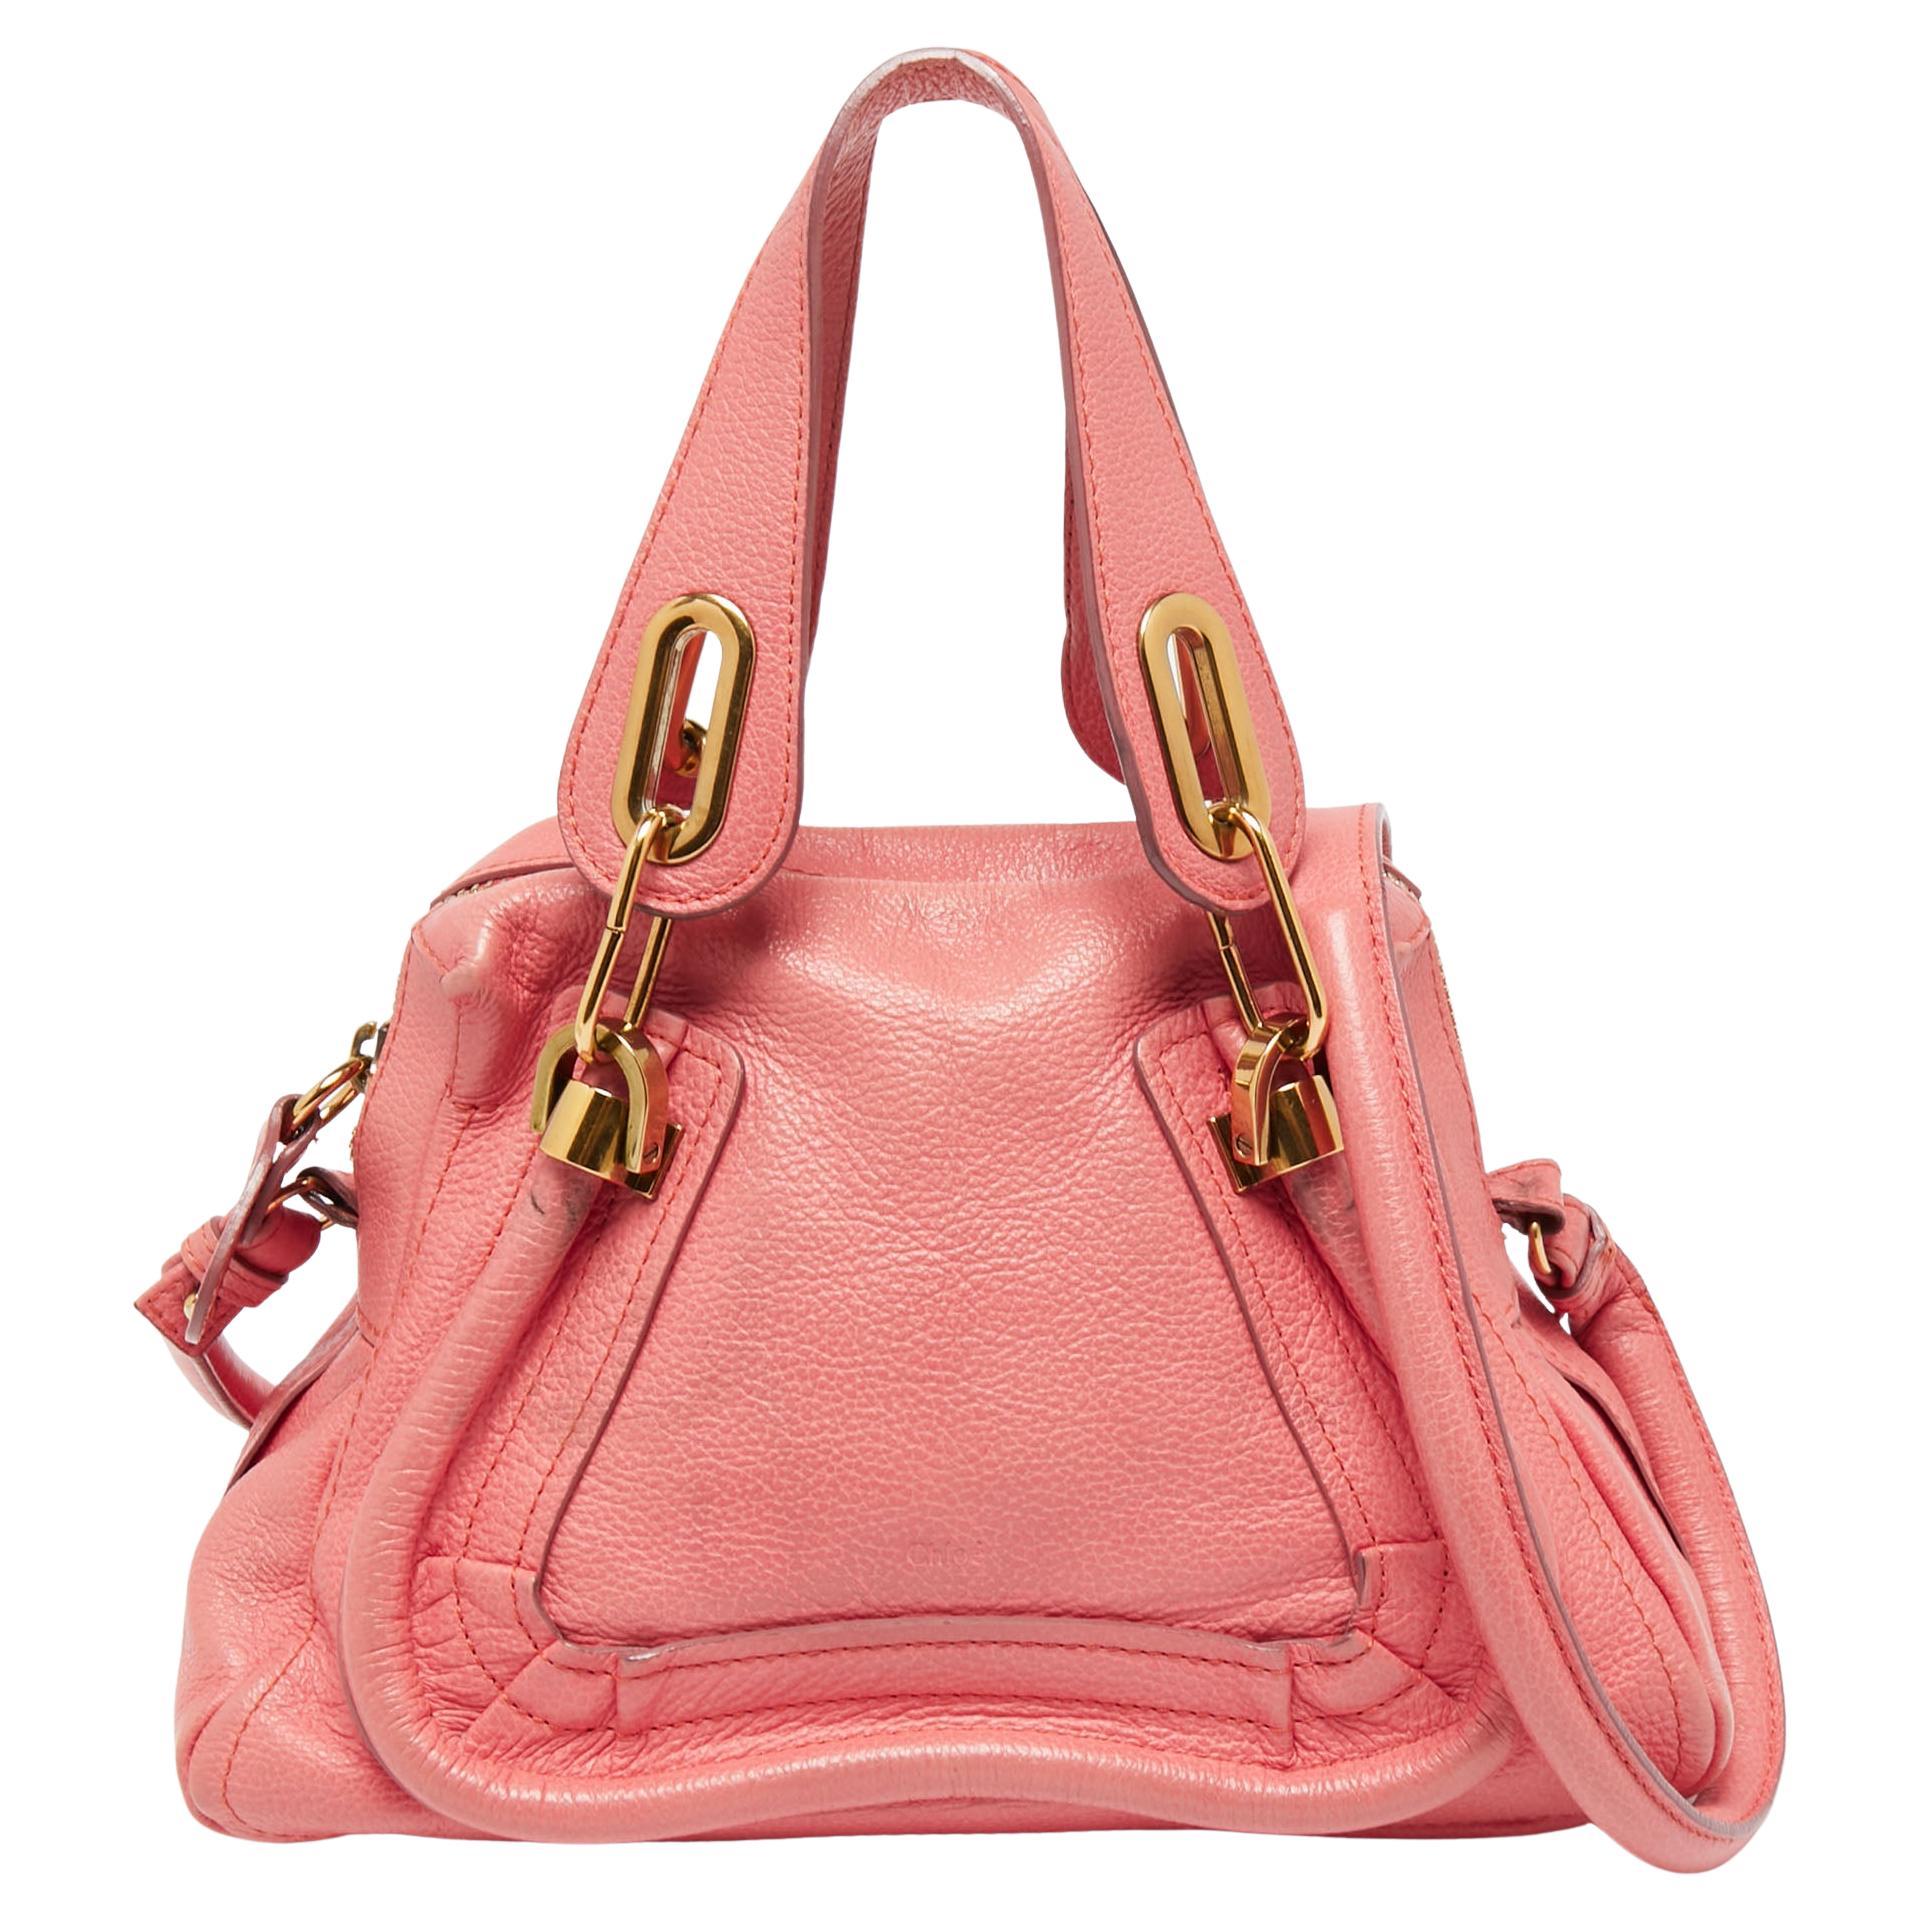 Chloe Coral Pink Leather Small Paraty Bag